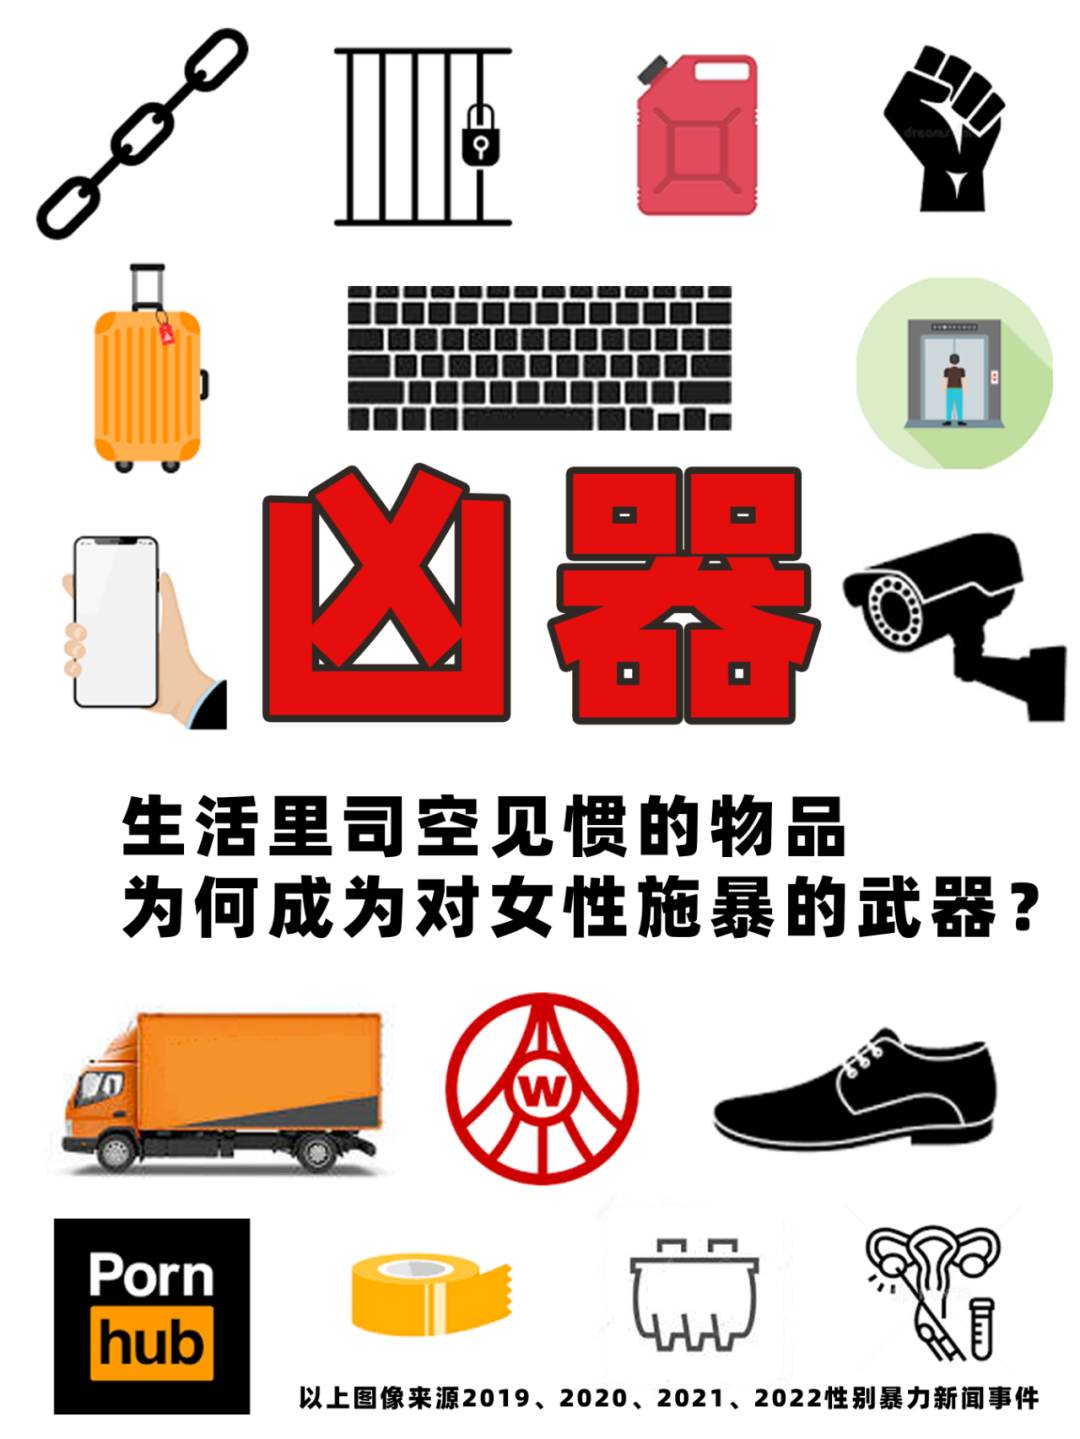 A white poster with stock images arranged in a grid: a chain, a jail cell, a gasoline canister, a raised fist, a suitcase, a computer keyboard, an elevator, a cell phone, a security camera, a moving van, the logo of Wuliangye brand liquor , a shoe, the Pornhub logo, a roll of masking tape, a septic tank, and a drawing of a uterus, fallopian tubes and ovaries.